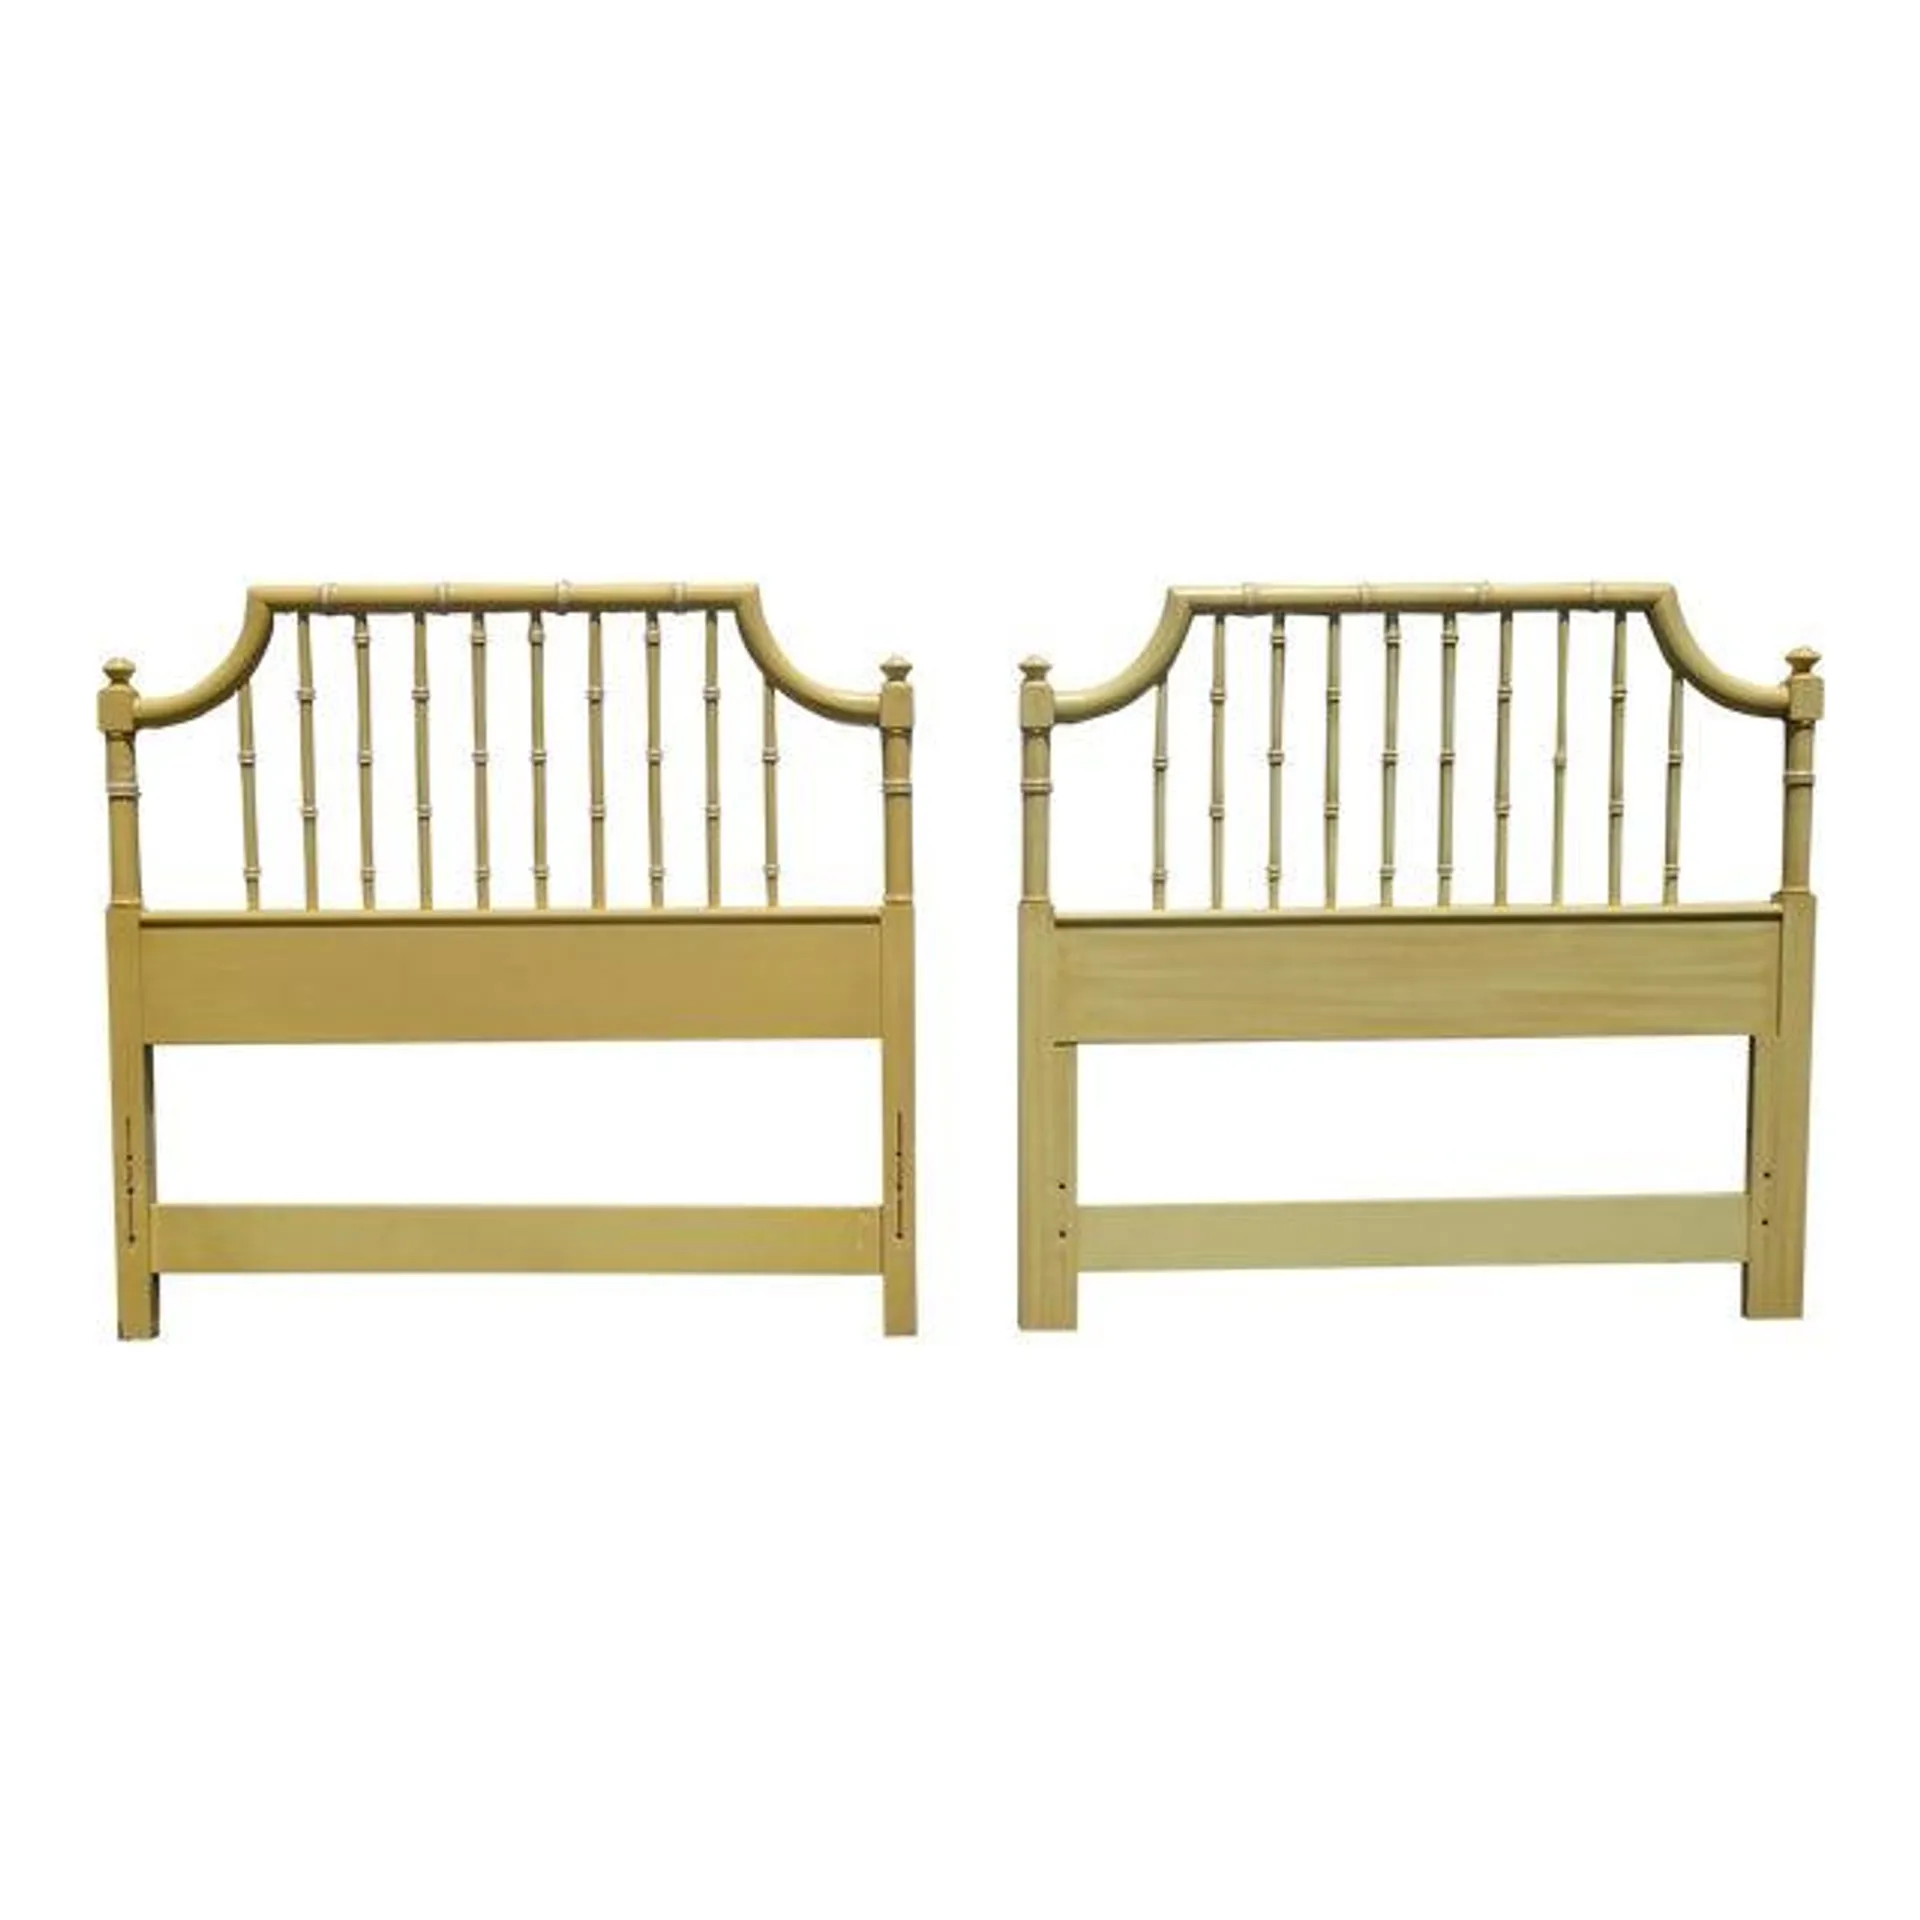 Vintage French Country Yellow Twin Headboards Bed Frames by Thomasville